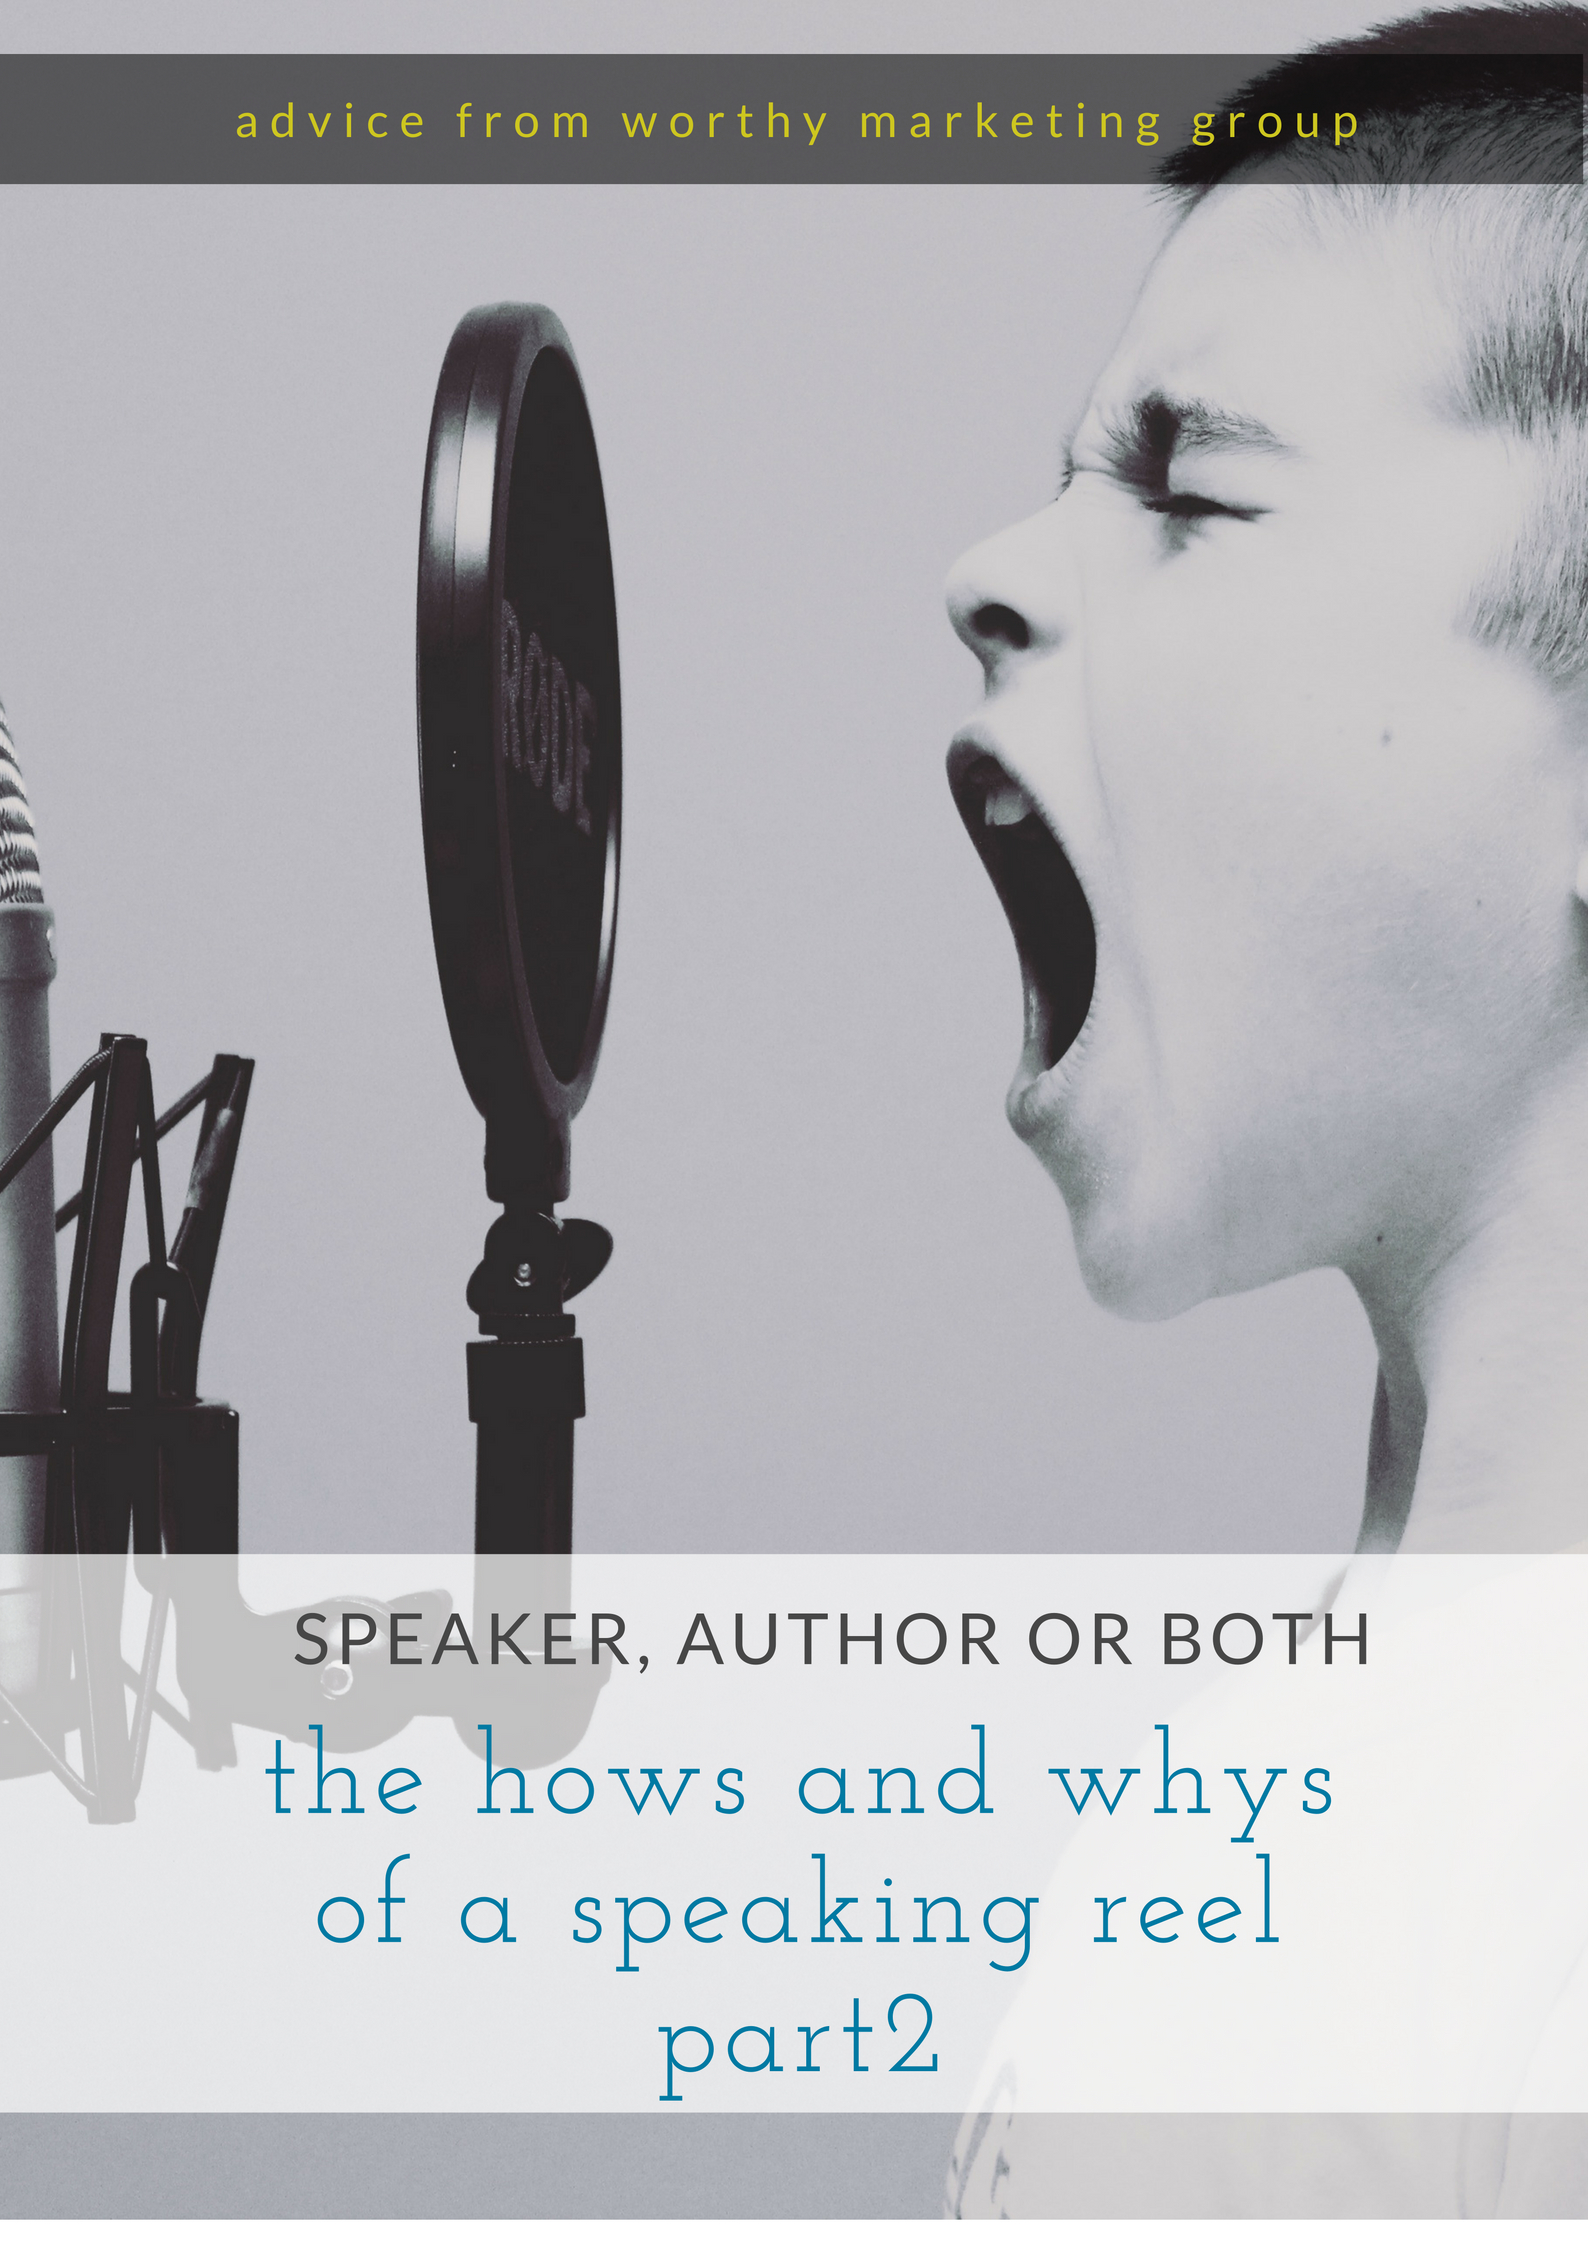 Author, Speaker, or Both - Speaking Reels - Part 2 of 2 | The Worthy Marketing Group Blog